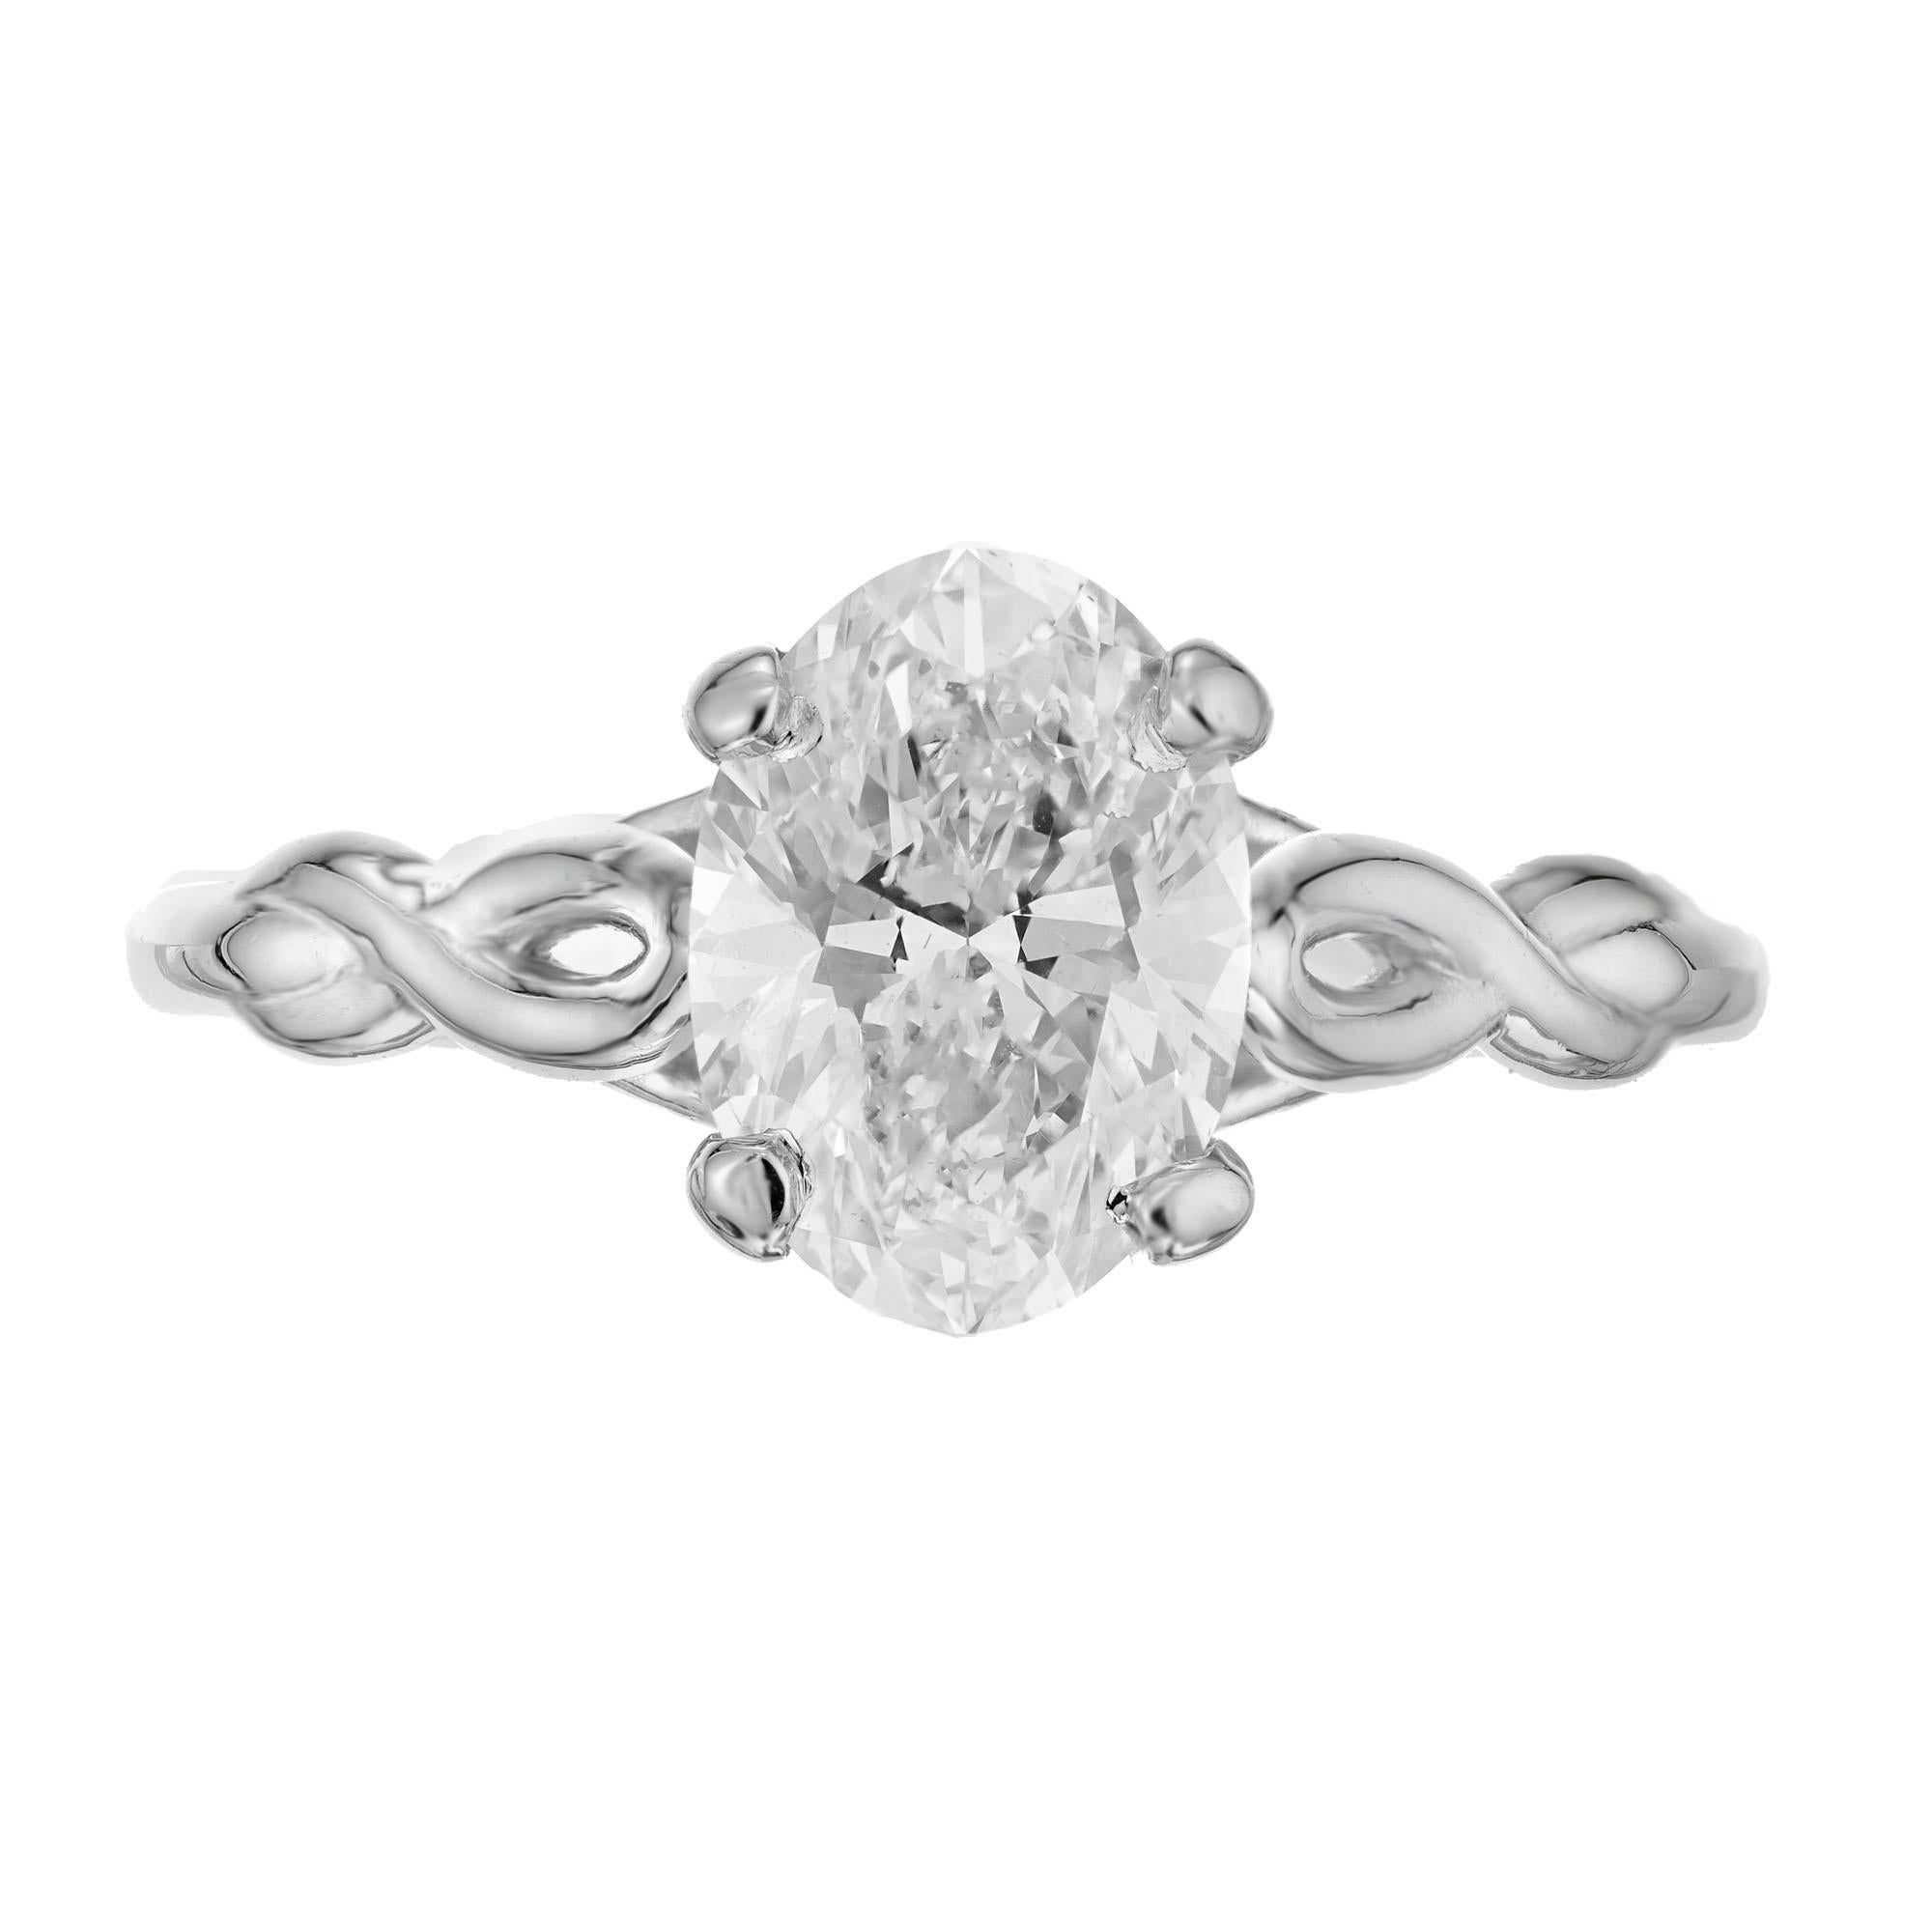 Oval diamond engagement ring. GIA certified oval cut diamond center stone in a platinum solitaire open setting. Crafted in the Peter Suchy Workshop.  

1 oval diamond, approx. total weight 2.05cts, G, SI1 GIA certificate # 1186747857
Size 6.5 and